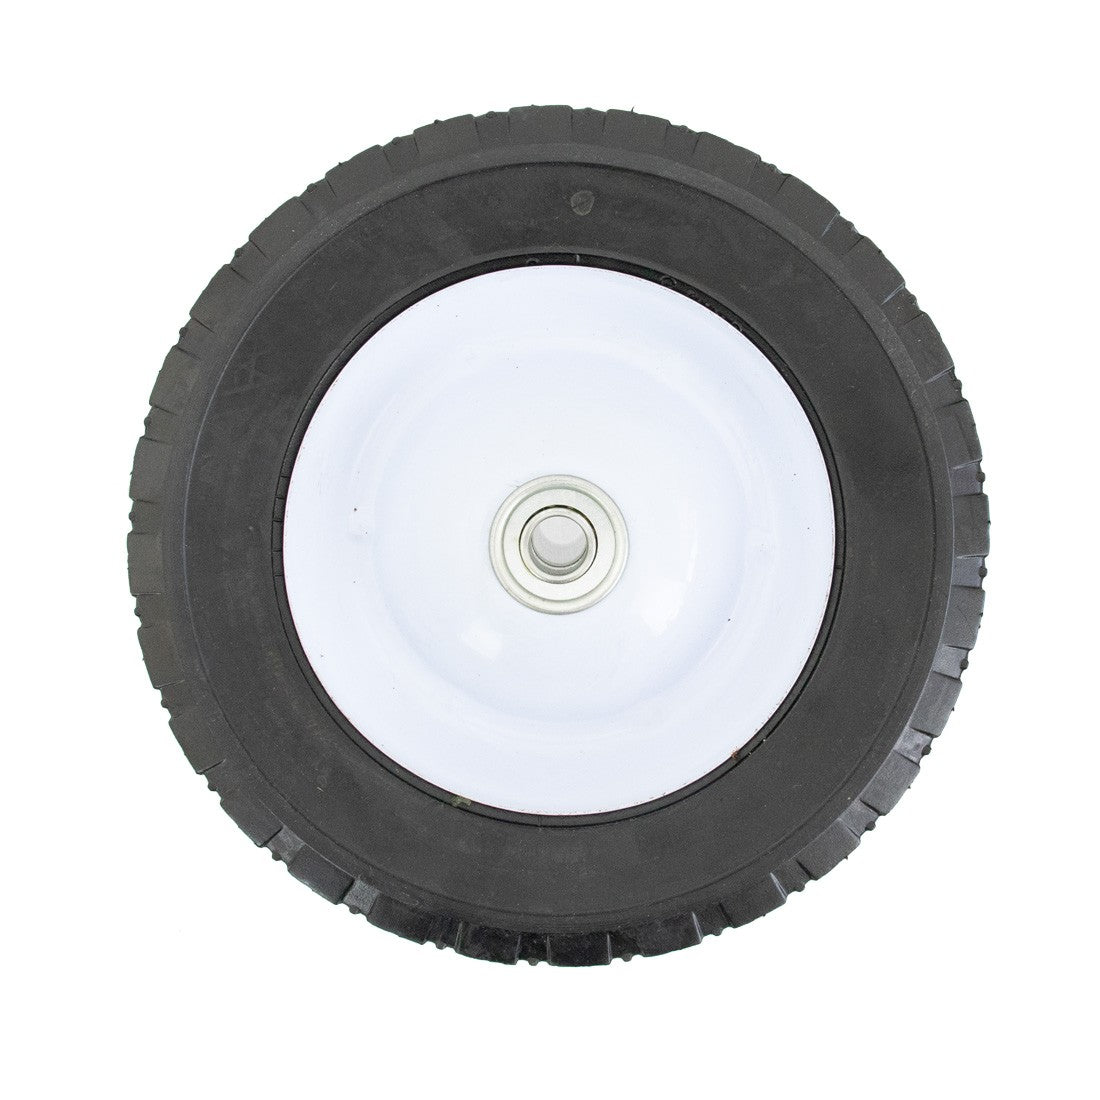 XERO Legacy Pure Wheel - 8 Inch - Front View